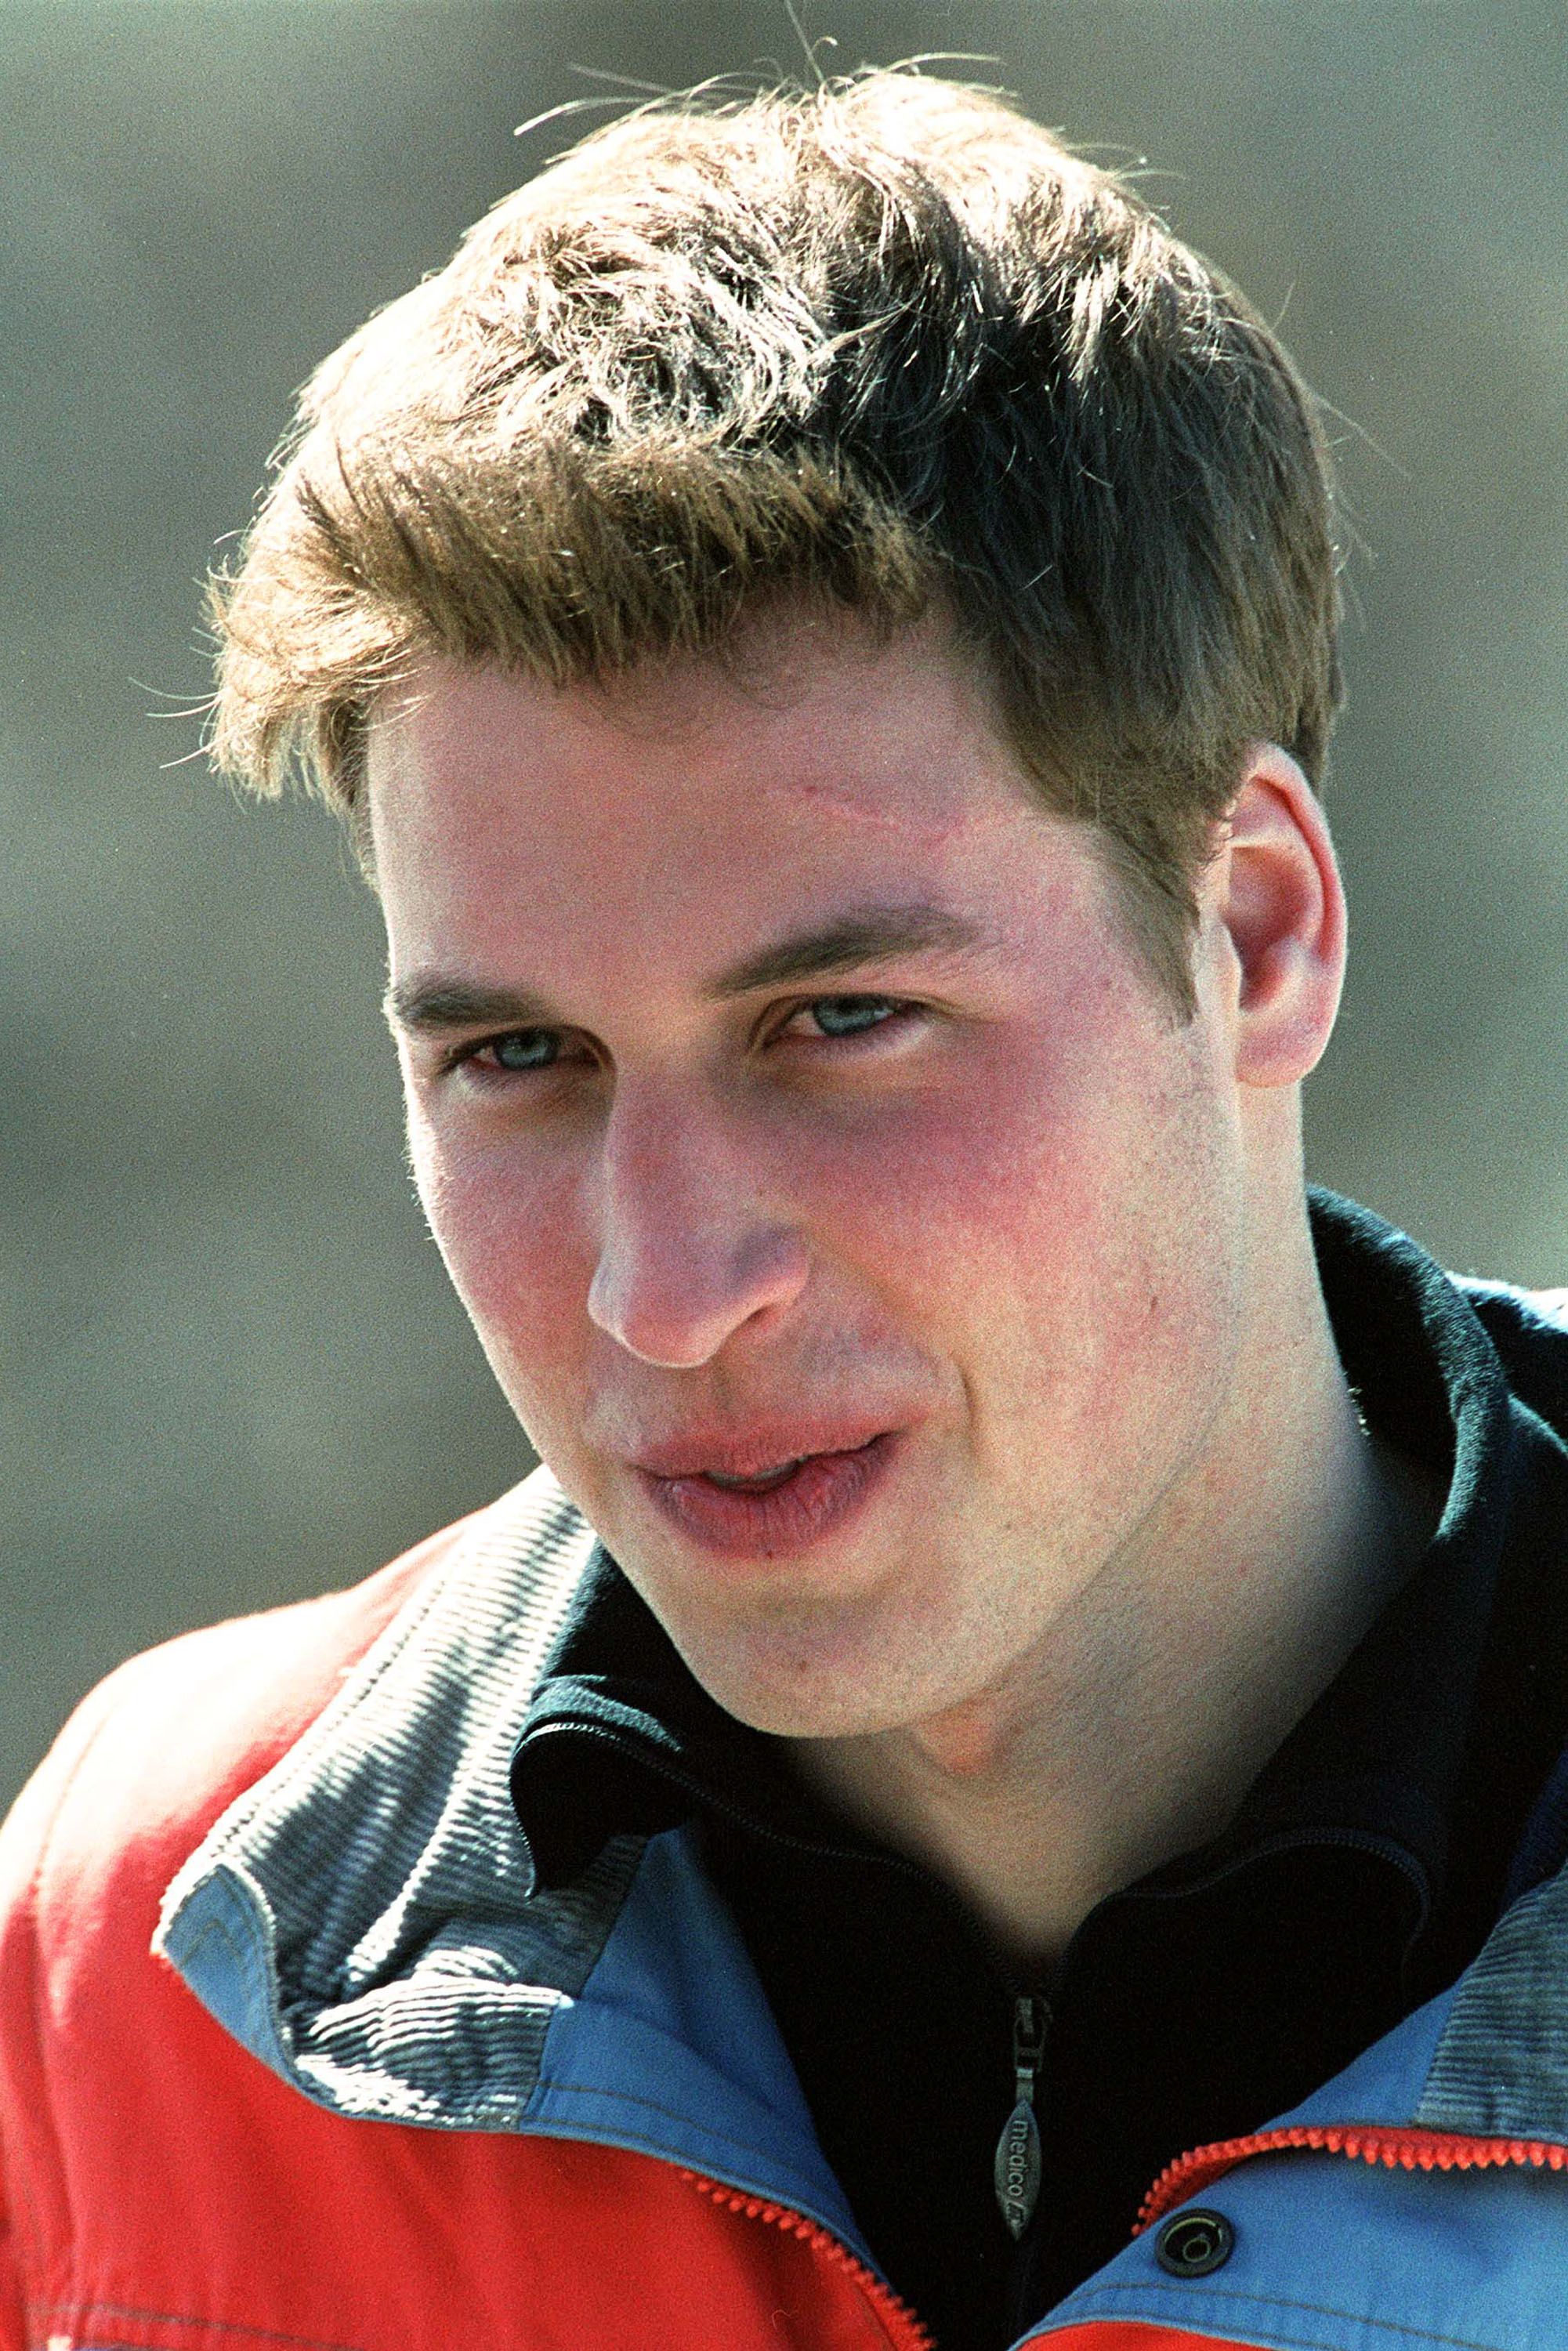 Prince William in an image taken on March 29, 2002, in Klosters, Switzerland. | Source: UK Press/Getty Images